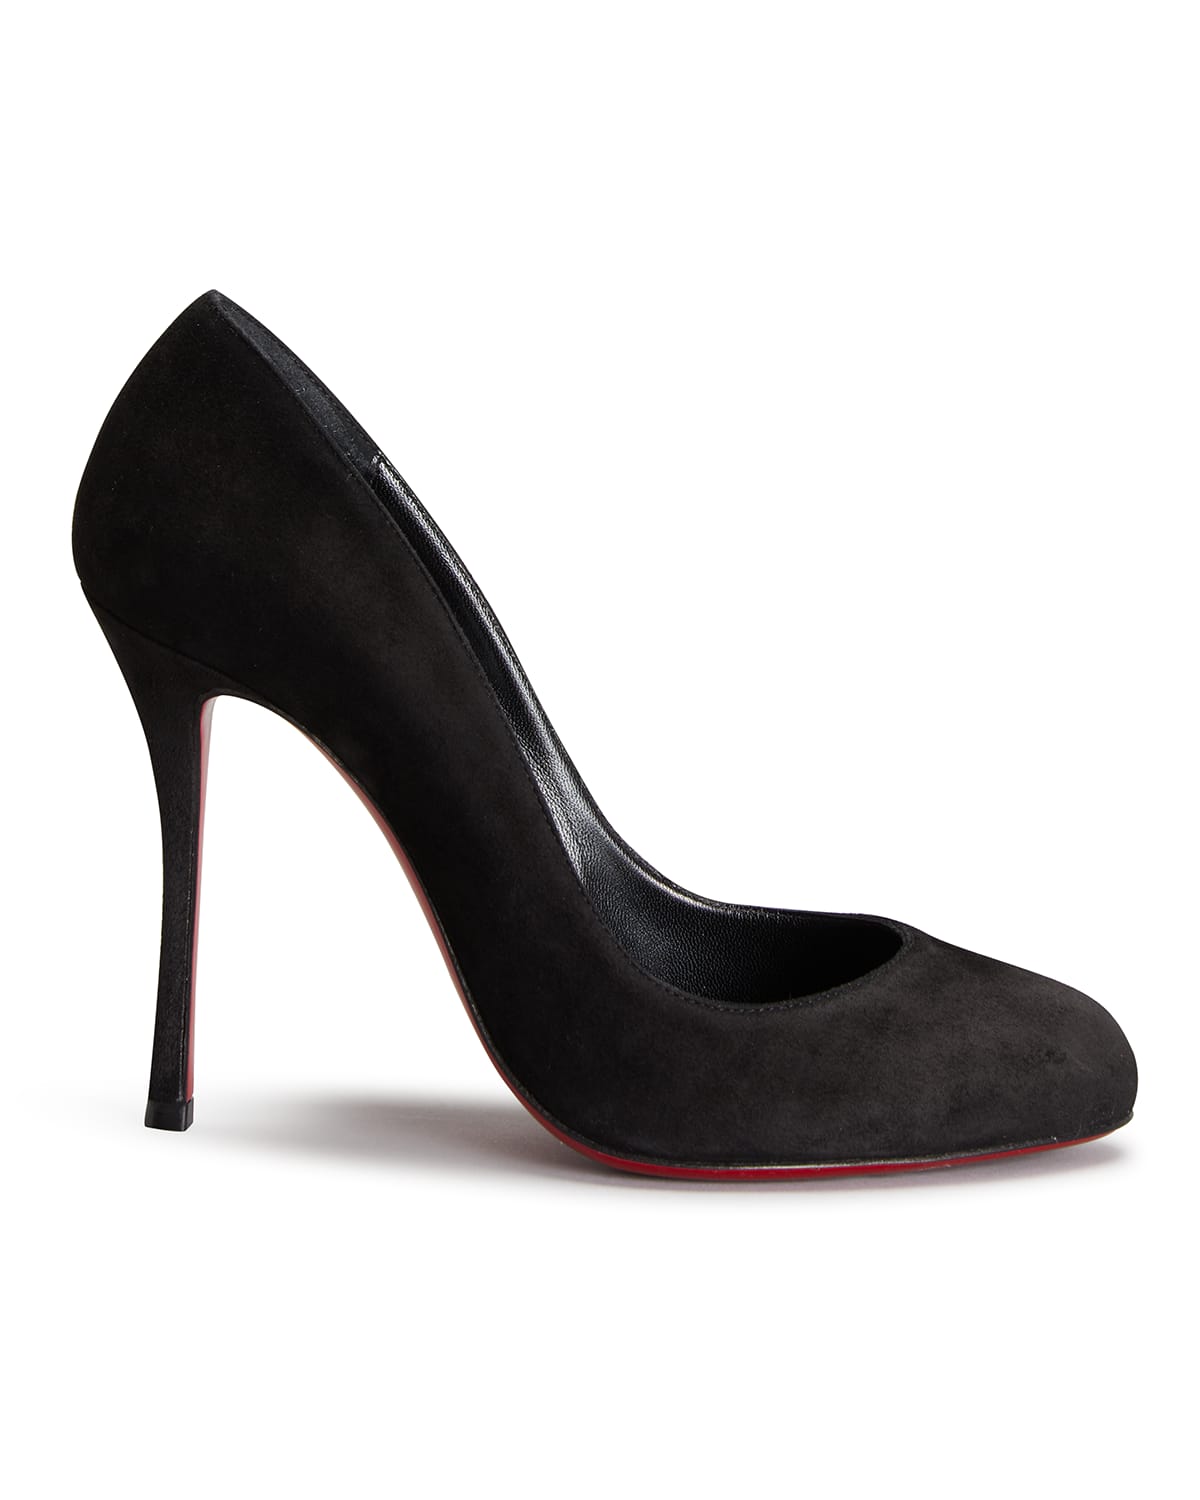 Christian Louboutin Dolly Suede Red Sole Pumps